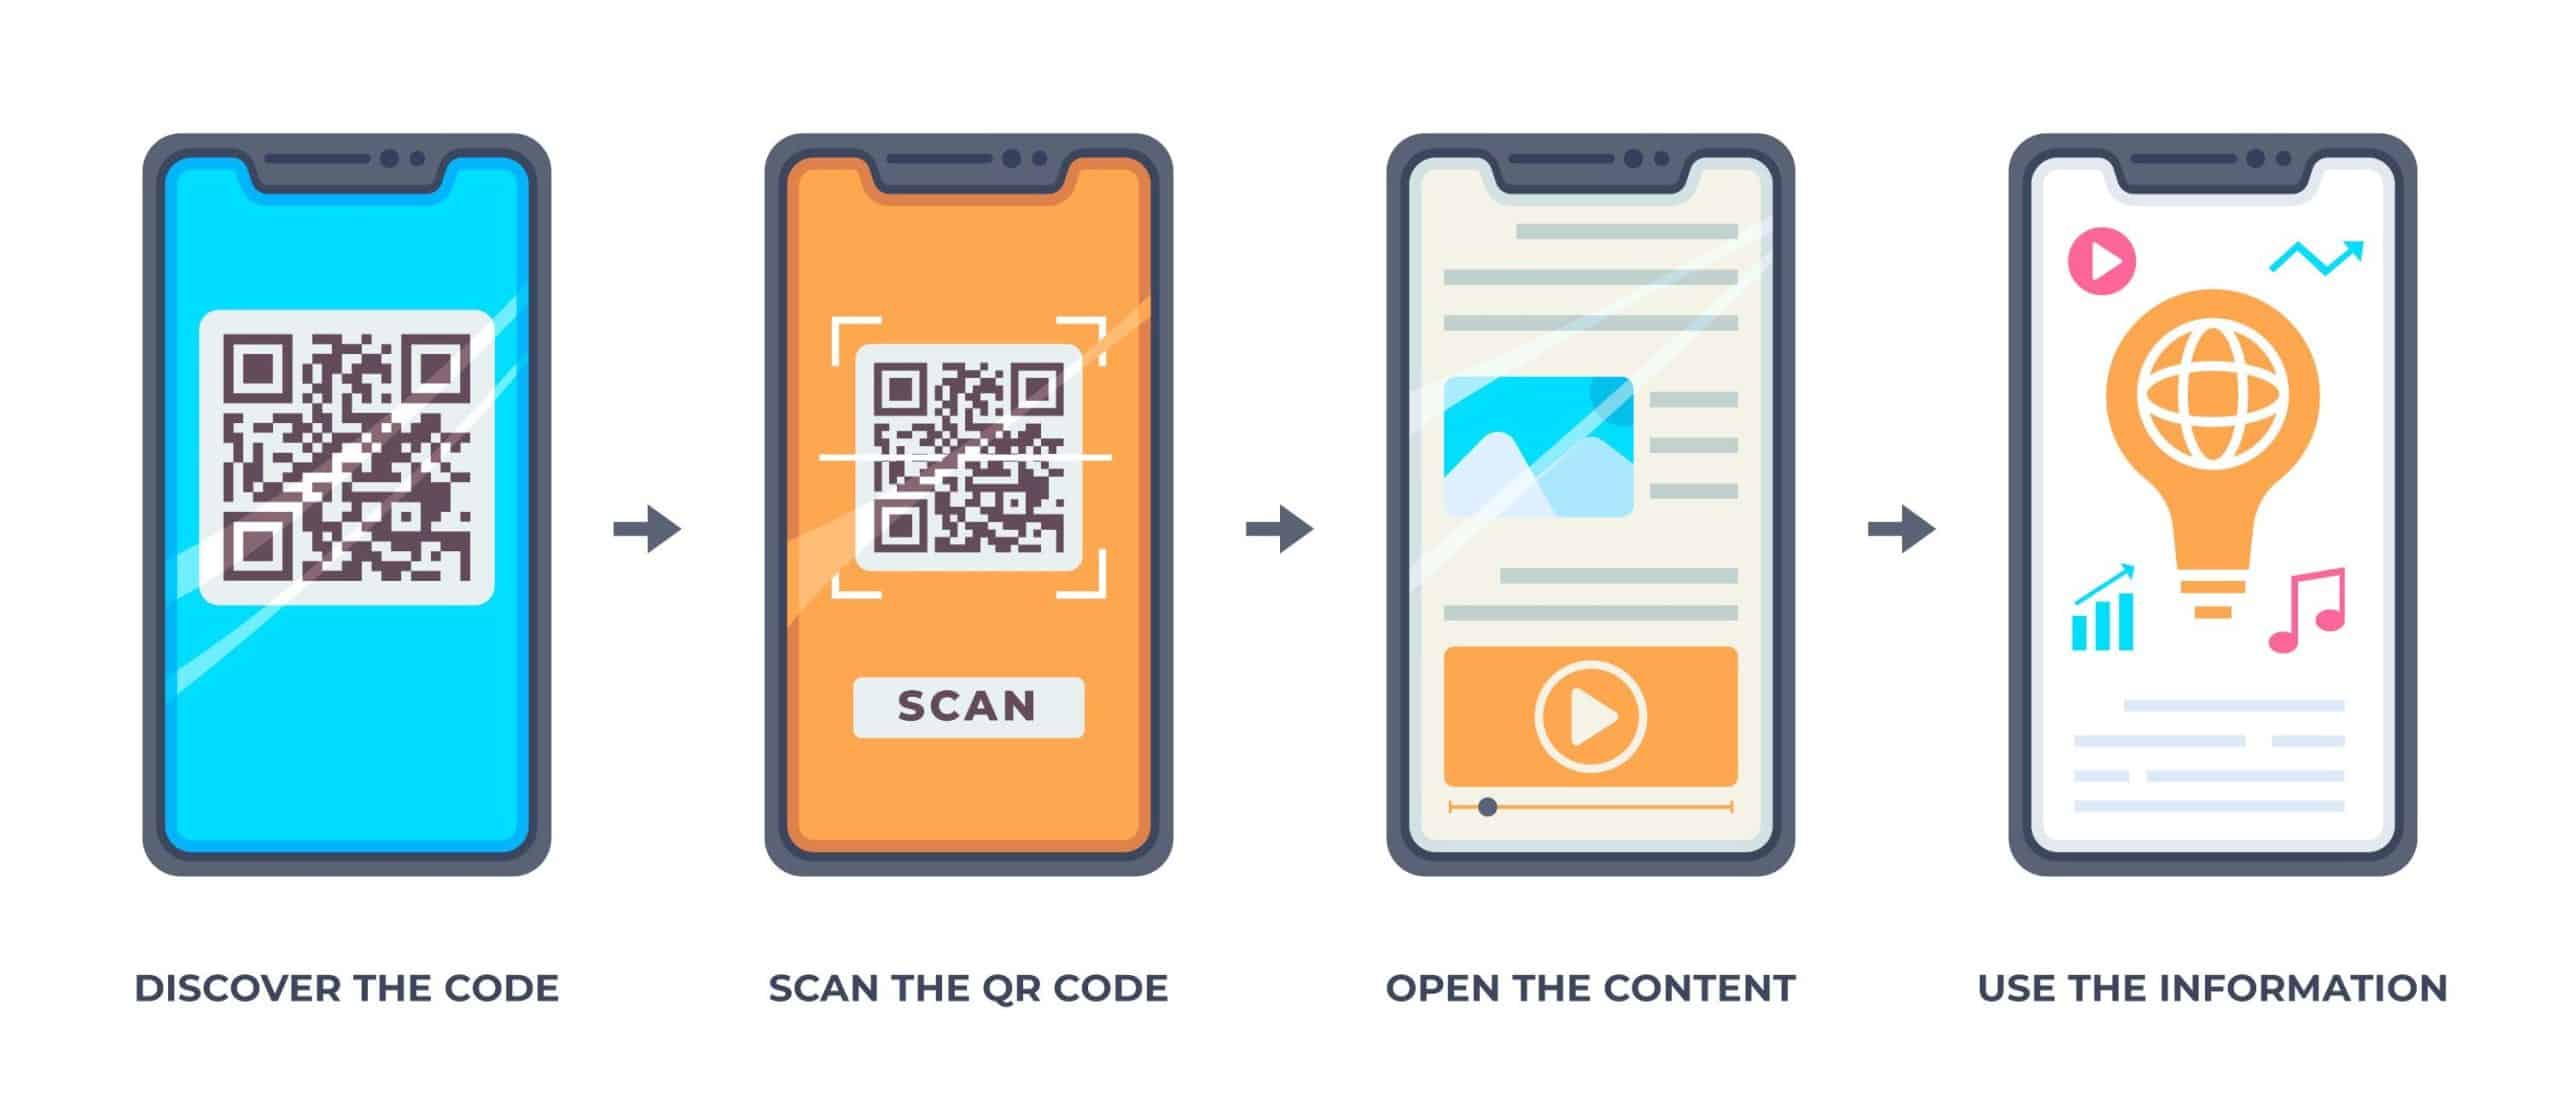 Discover the top 5 benefits of using QR codes in employee apps. From increased efficiency and productivity to enhanced security and engagement, learn how QR codes can help your organization streamline processes and improve communication with your workforce. Read on to find out more.